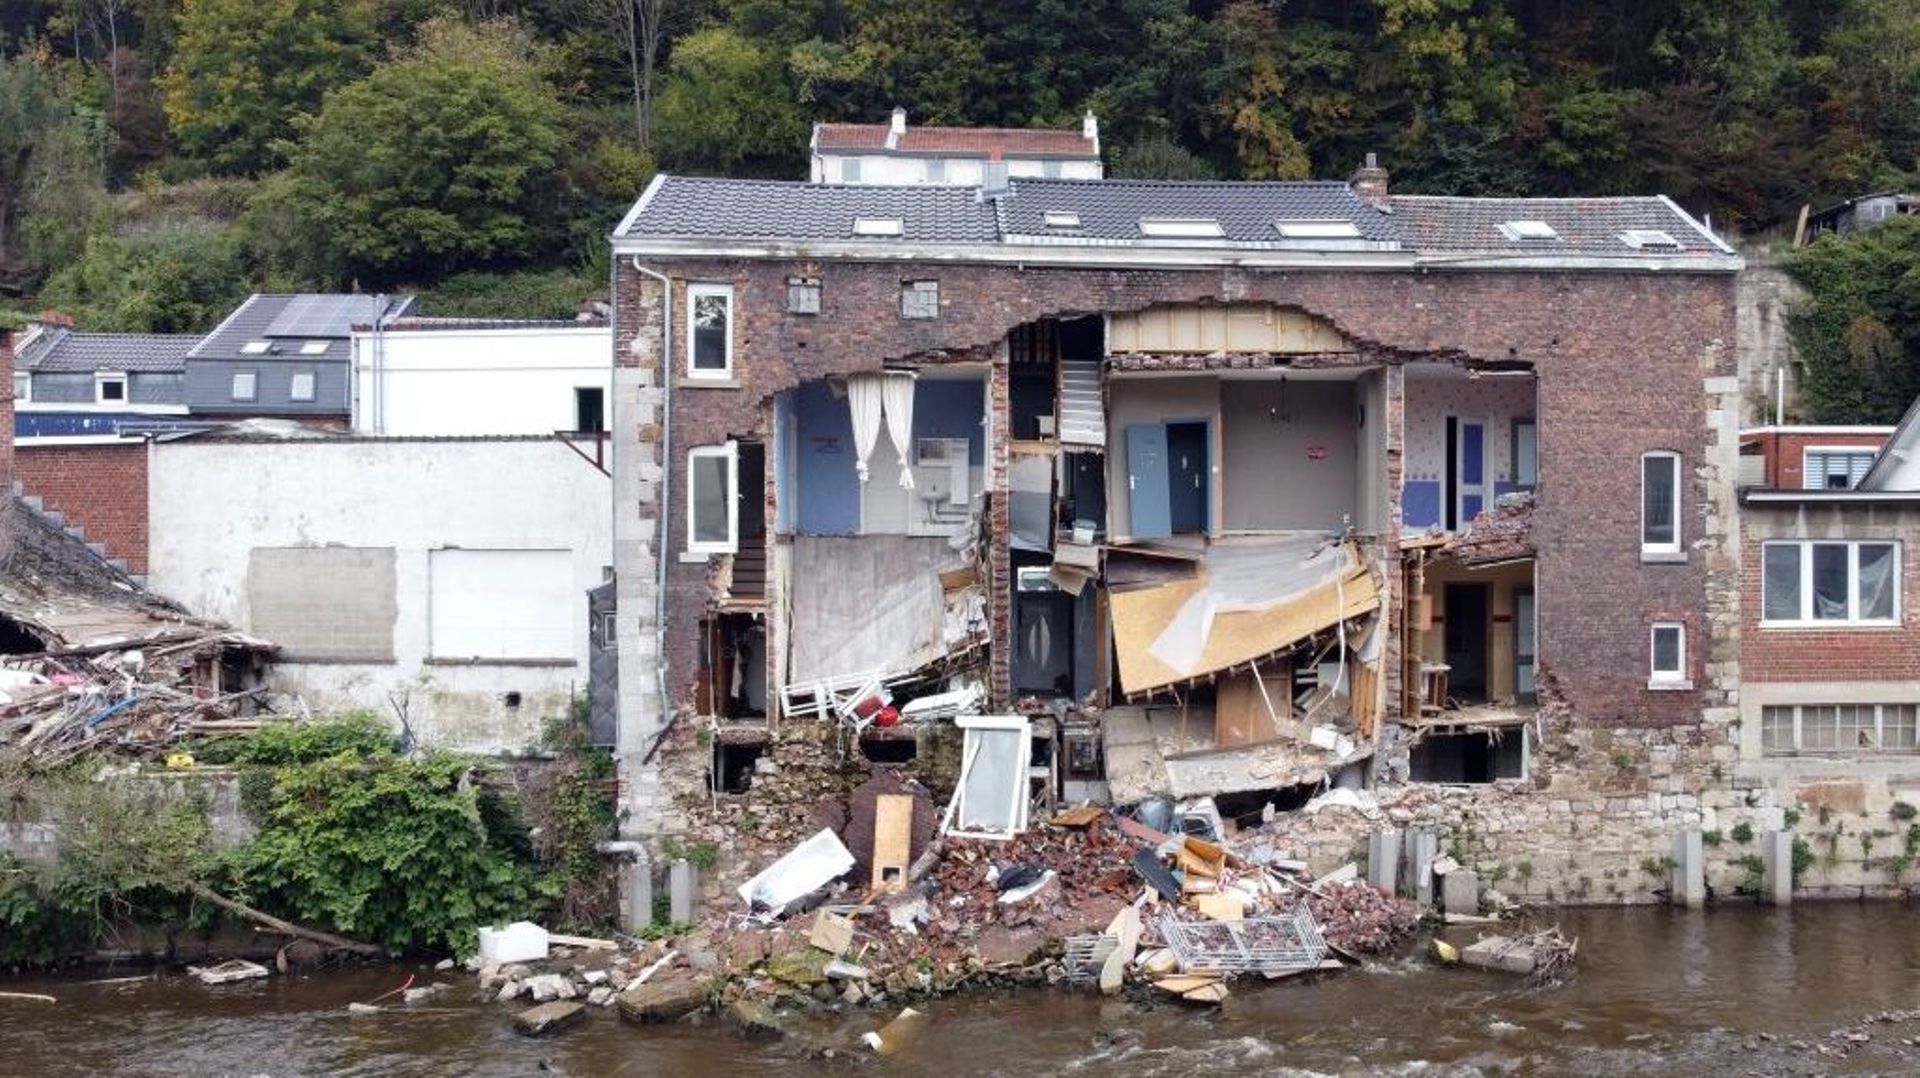 Aftermath of the flood in Belgium